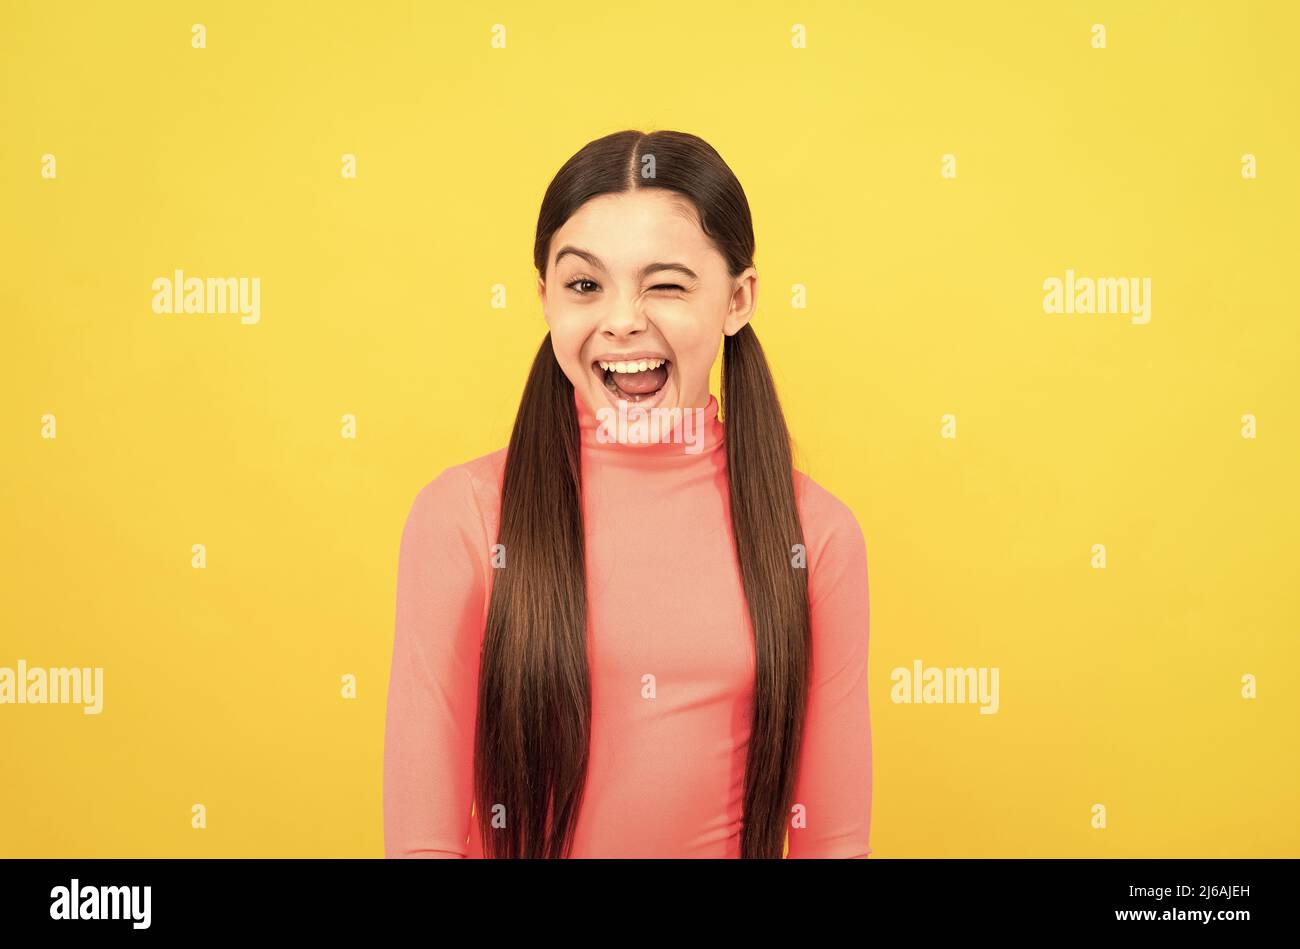 winking child with long hair on yellow background, emotions Stock Photo